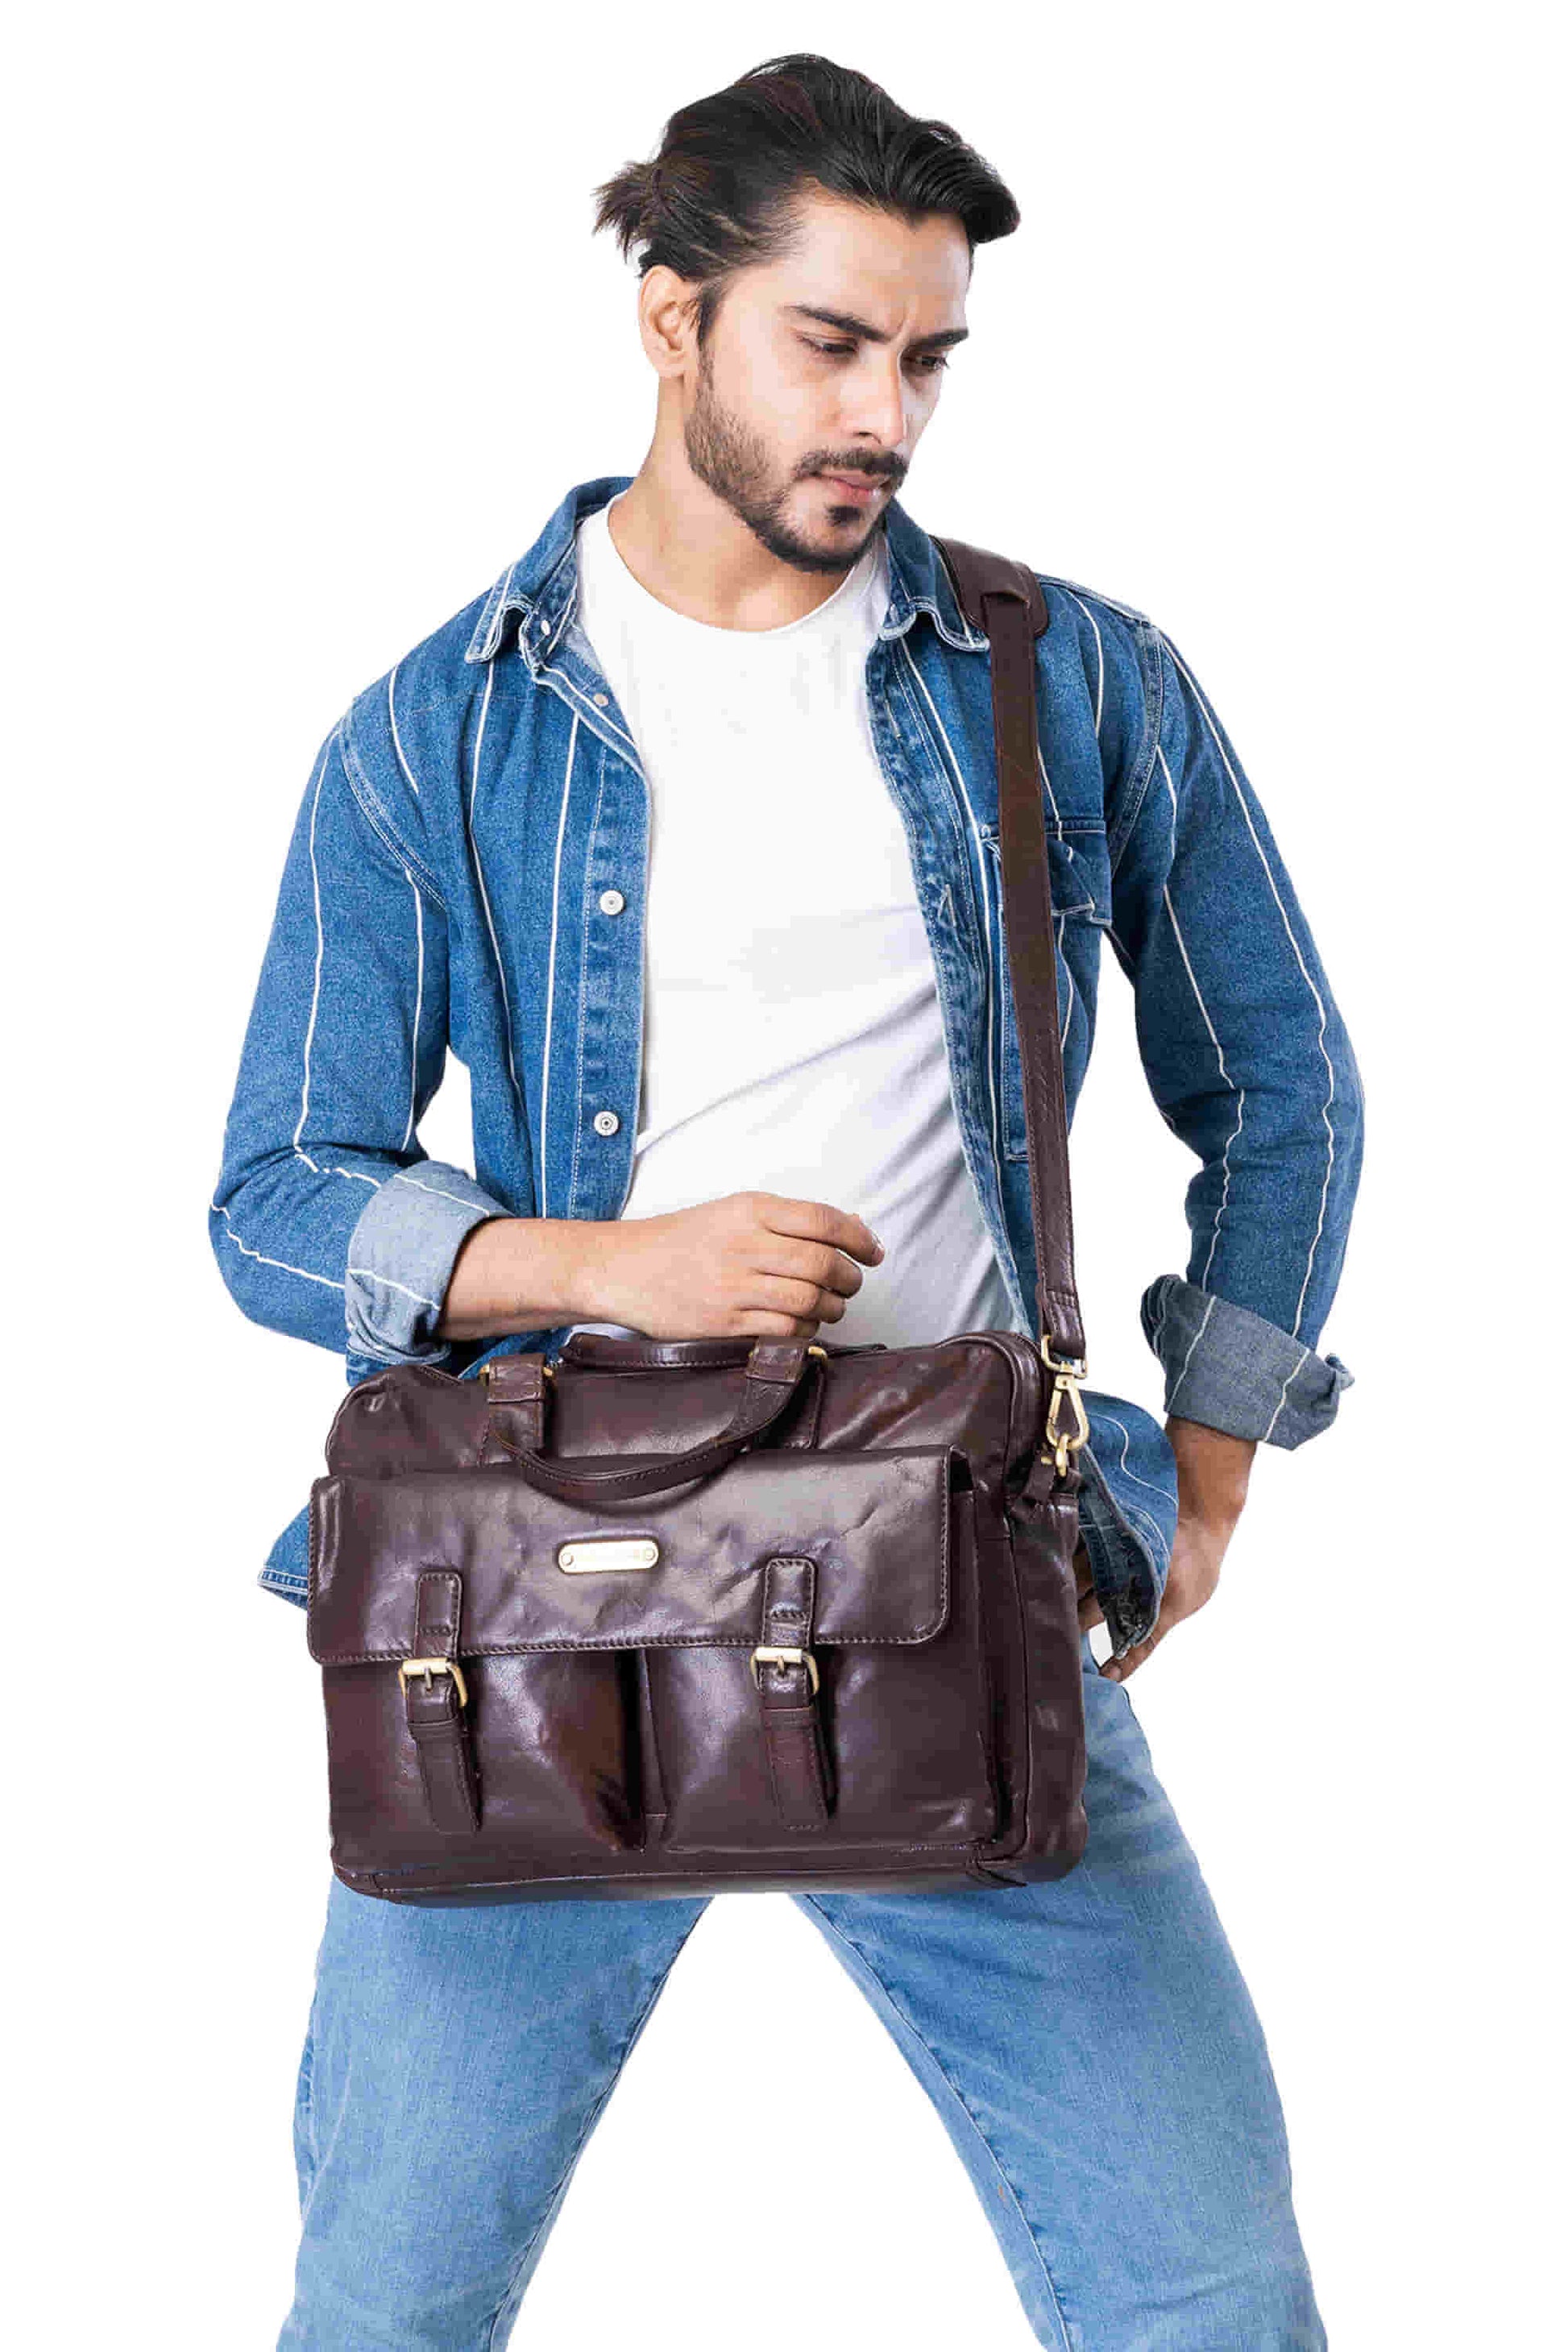 Style n Craft 392500 Cross Body Messenger Bag in Full Grain Dark Brown Vintage Leather - in use as a cross body shoulder bag in the front